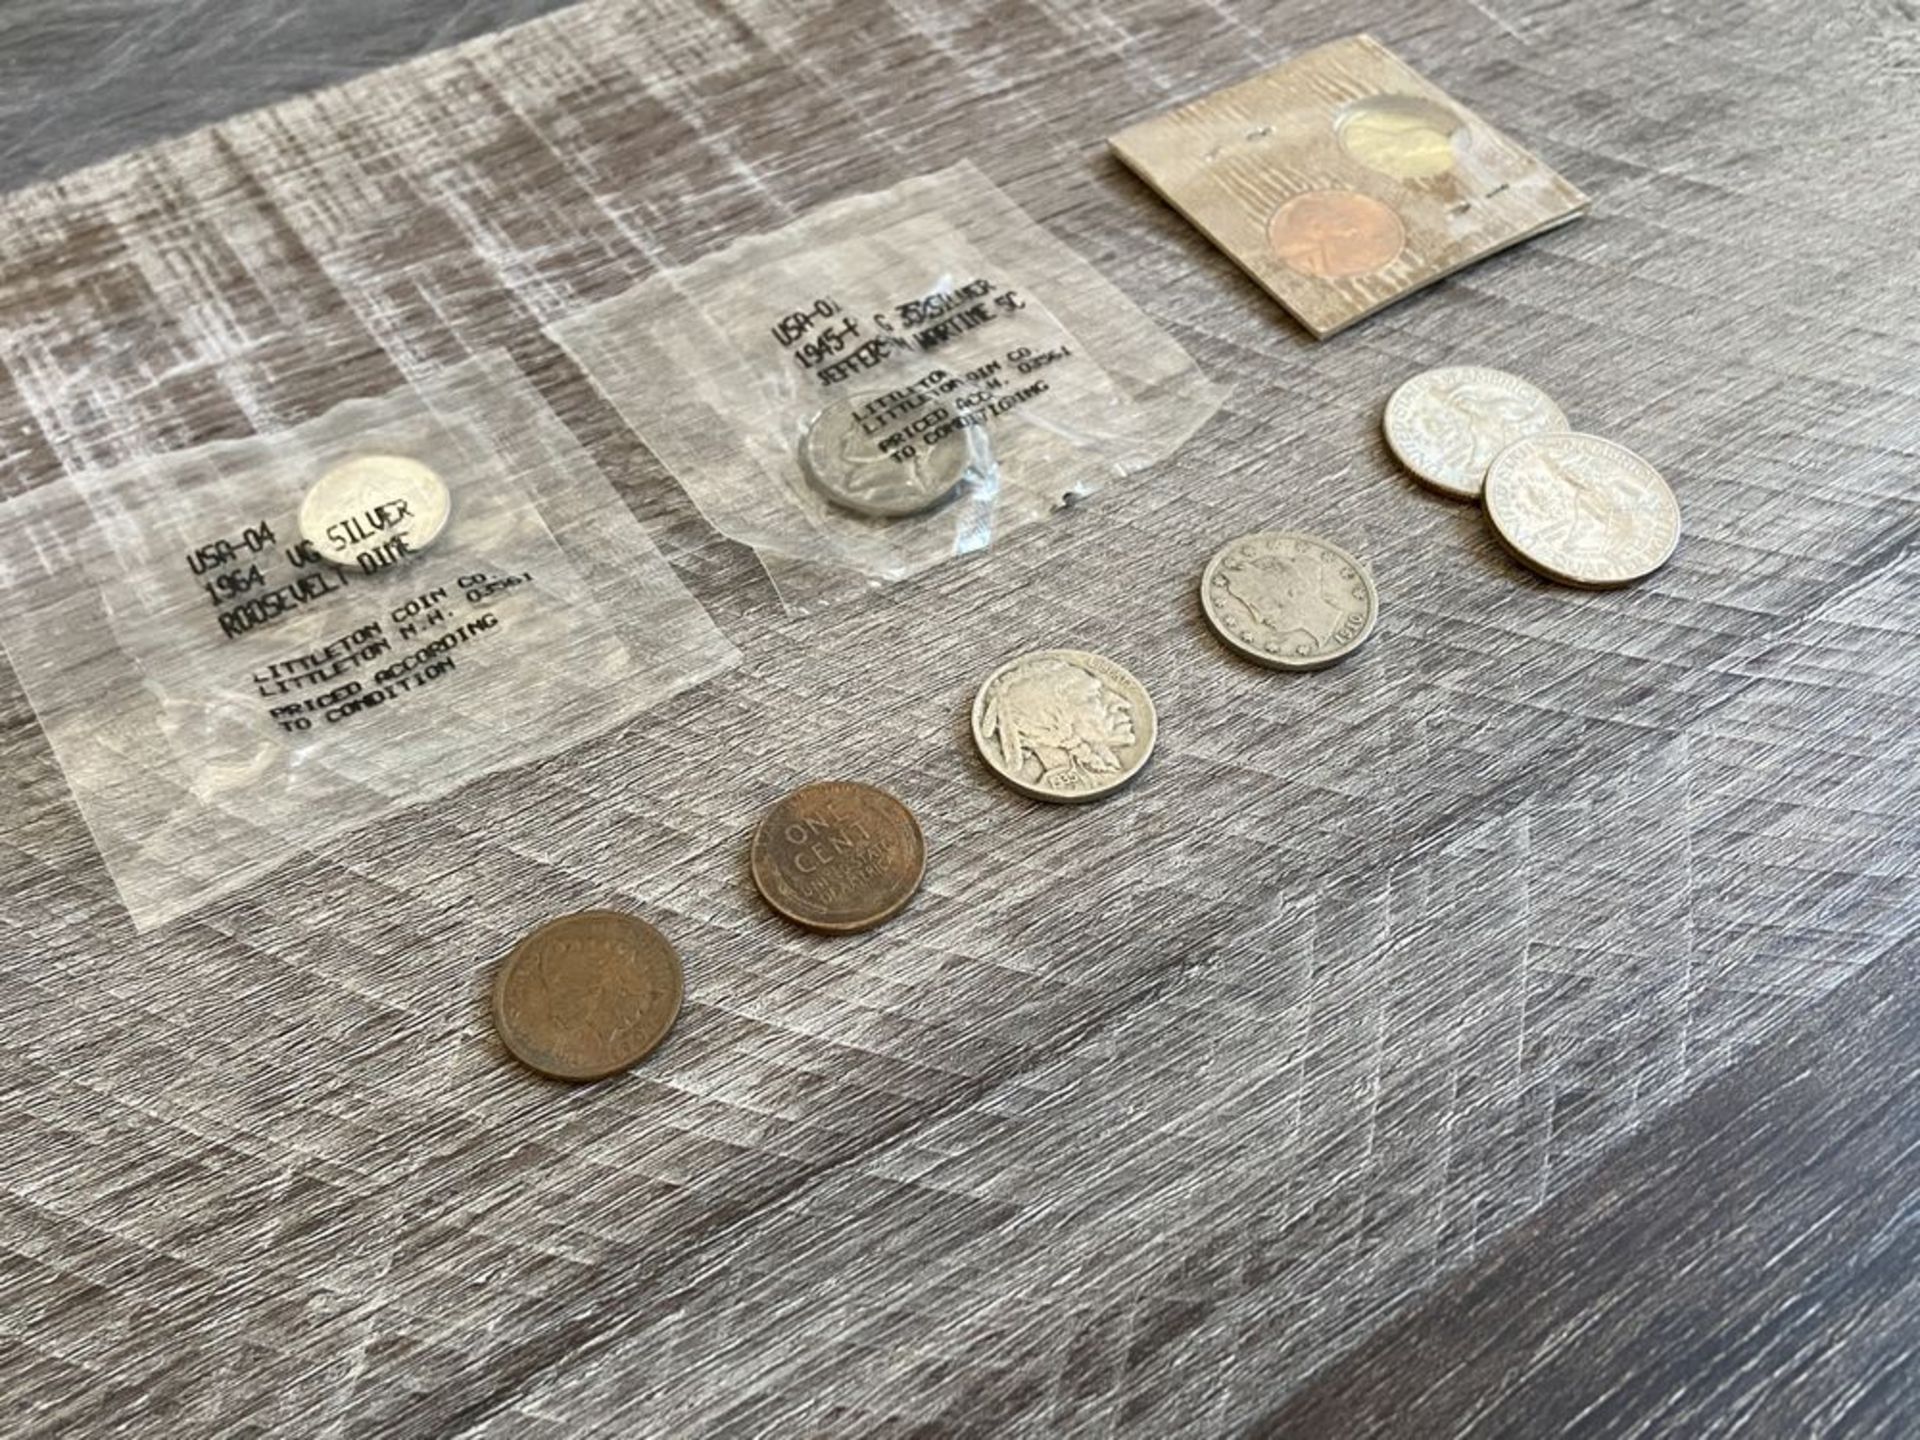 Collection of Old American Coins: Buffalo Nickle, Roosevelt Dime, Wheat Penny, Etc - Image 2 of 3